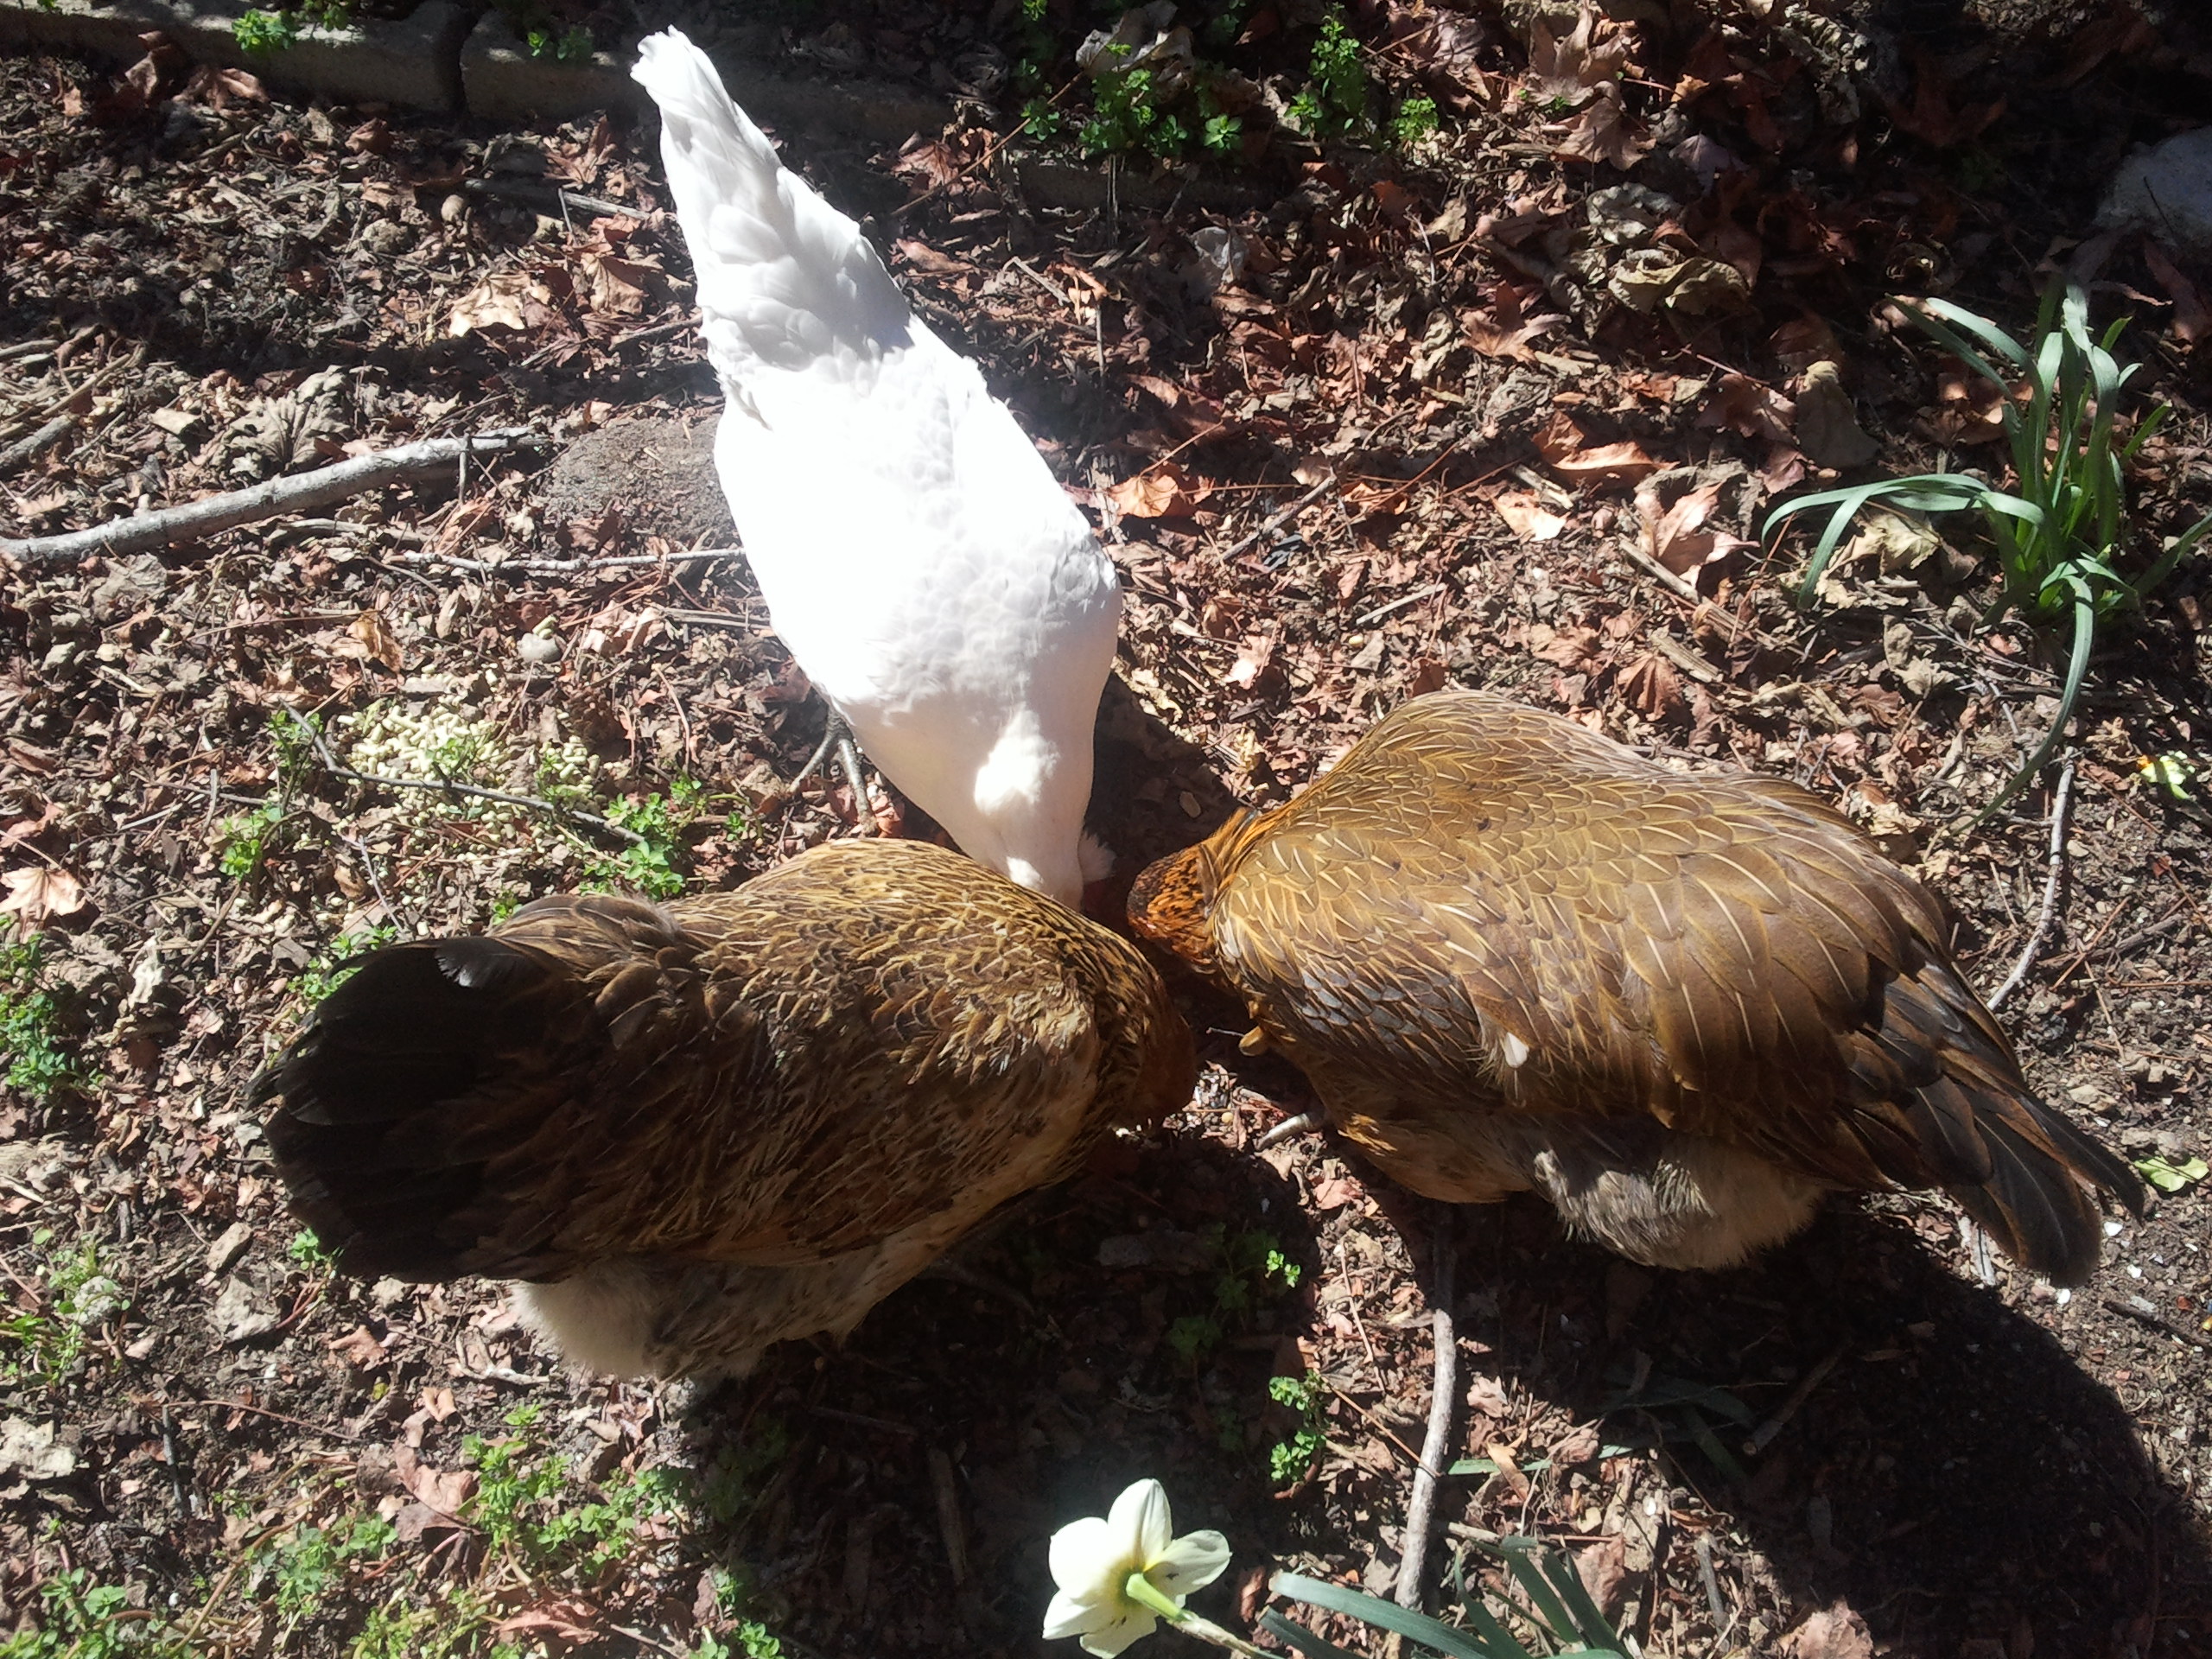 Backyard Farming Update Part 1: How We Got Our Chickens